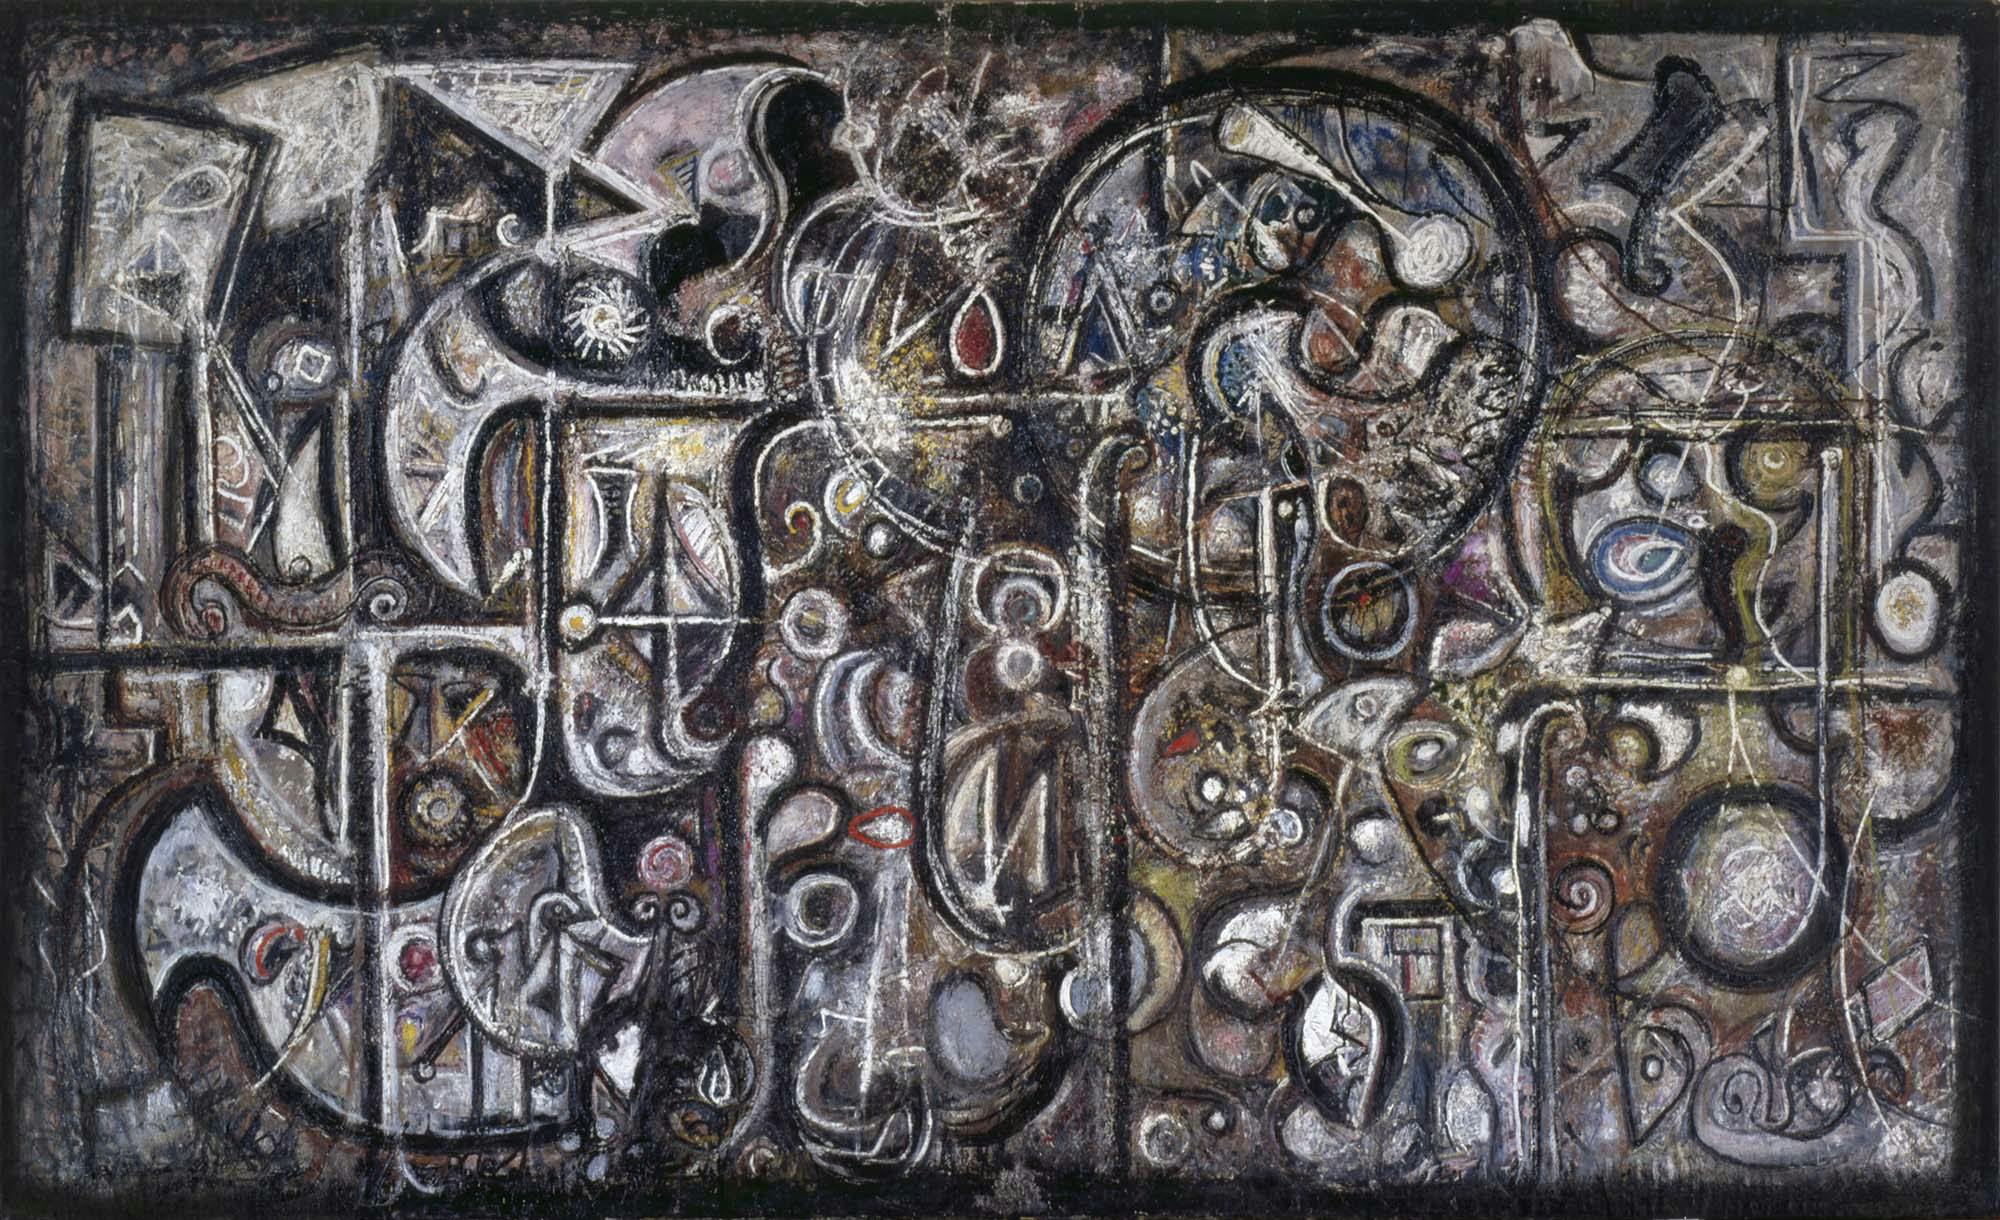 Symphony Number 1, The Transcendental
1941–42
Oil on canvas
86 x 140 1/2 in. (218.4 x 356.9 cm)
The Metropolitan Museum of Art, New York, Purchase, Lila Acheson Wallace Gift (1996.367)
 – The Richard Pousette-Dart Foundation